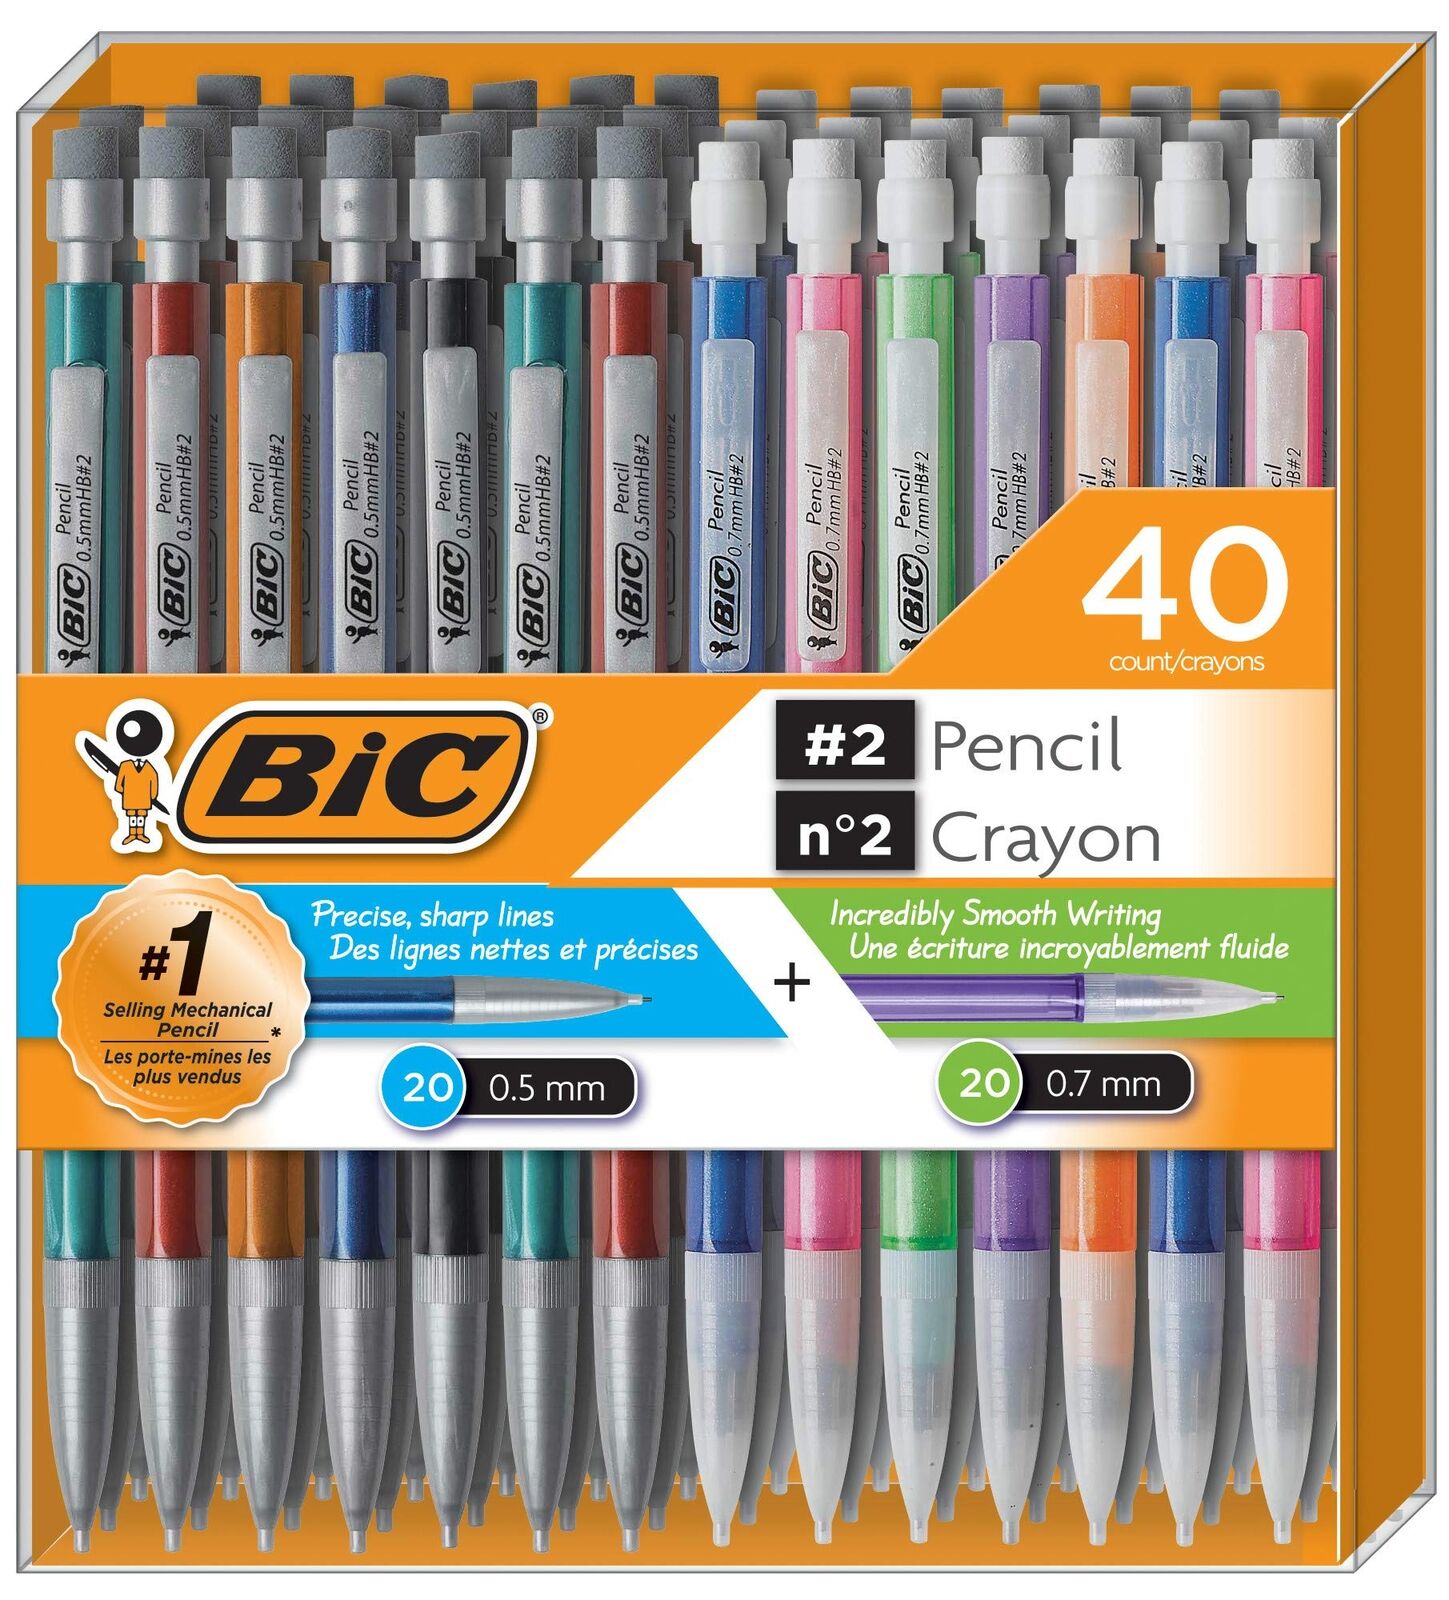 BIC Mechanical Pencil #2 EXTRA SMOOTH, Variety Bulk Pack Of 40 Mechanical Pencil